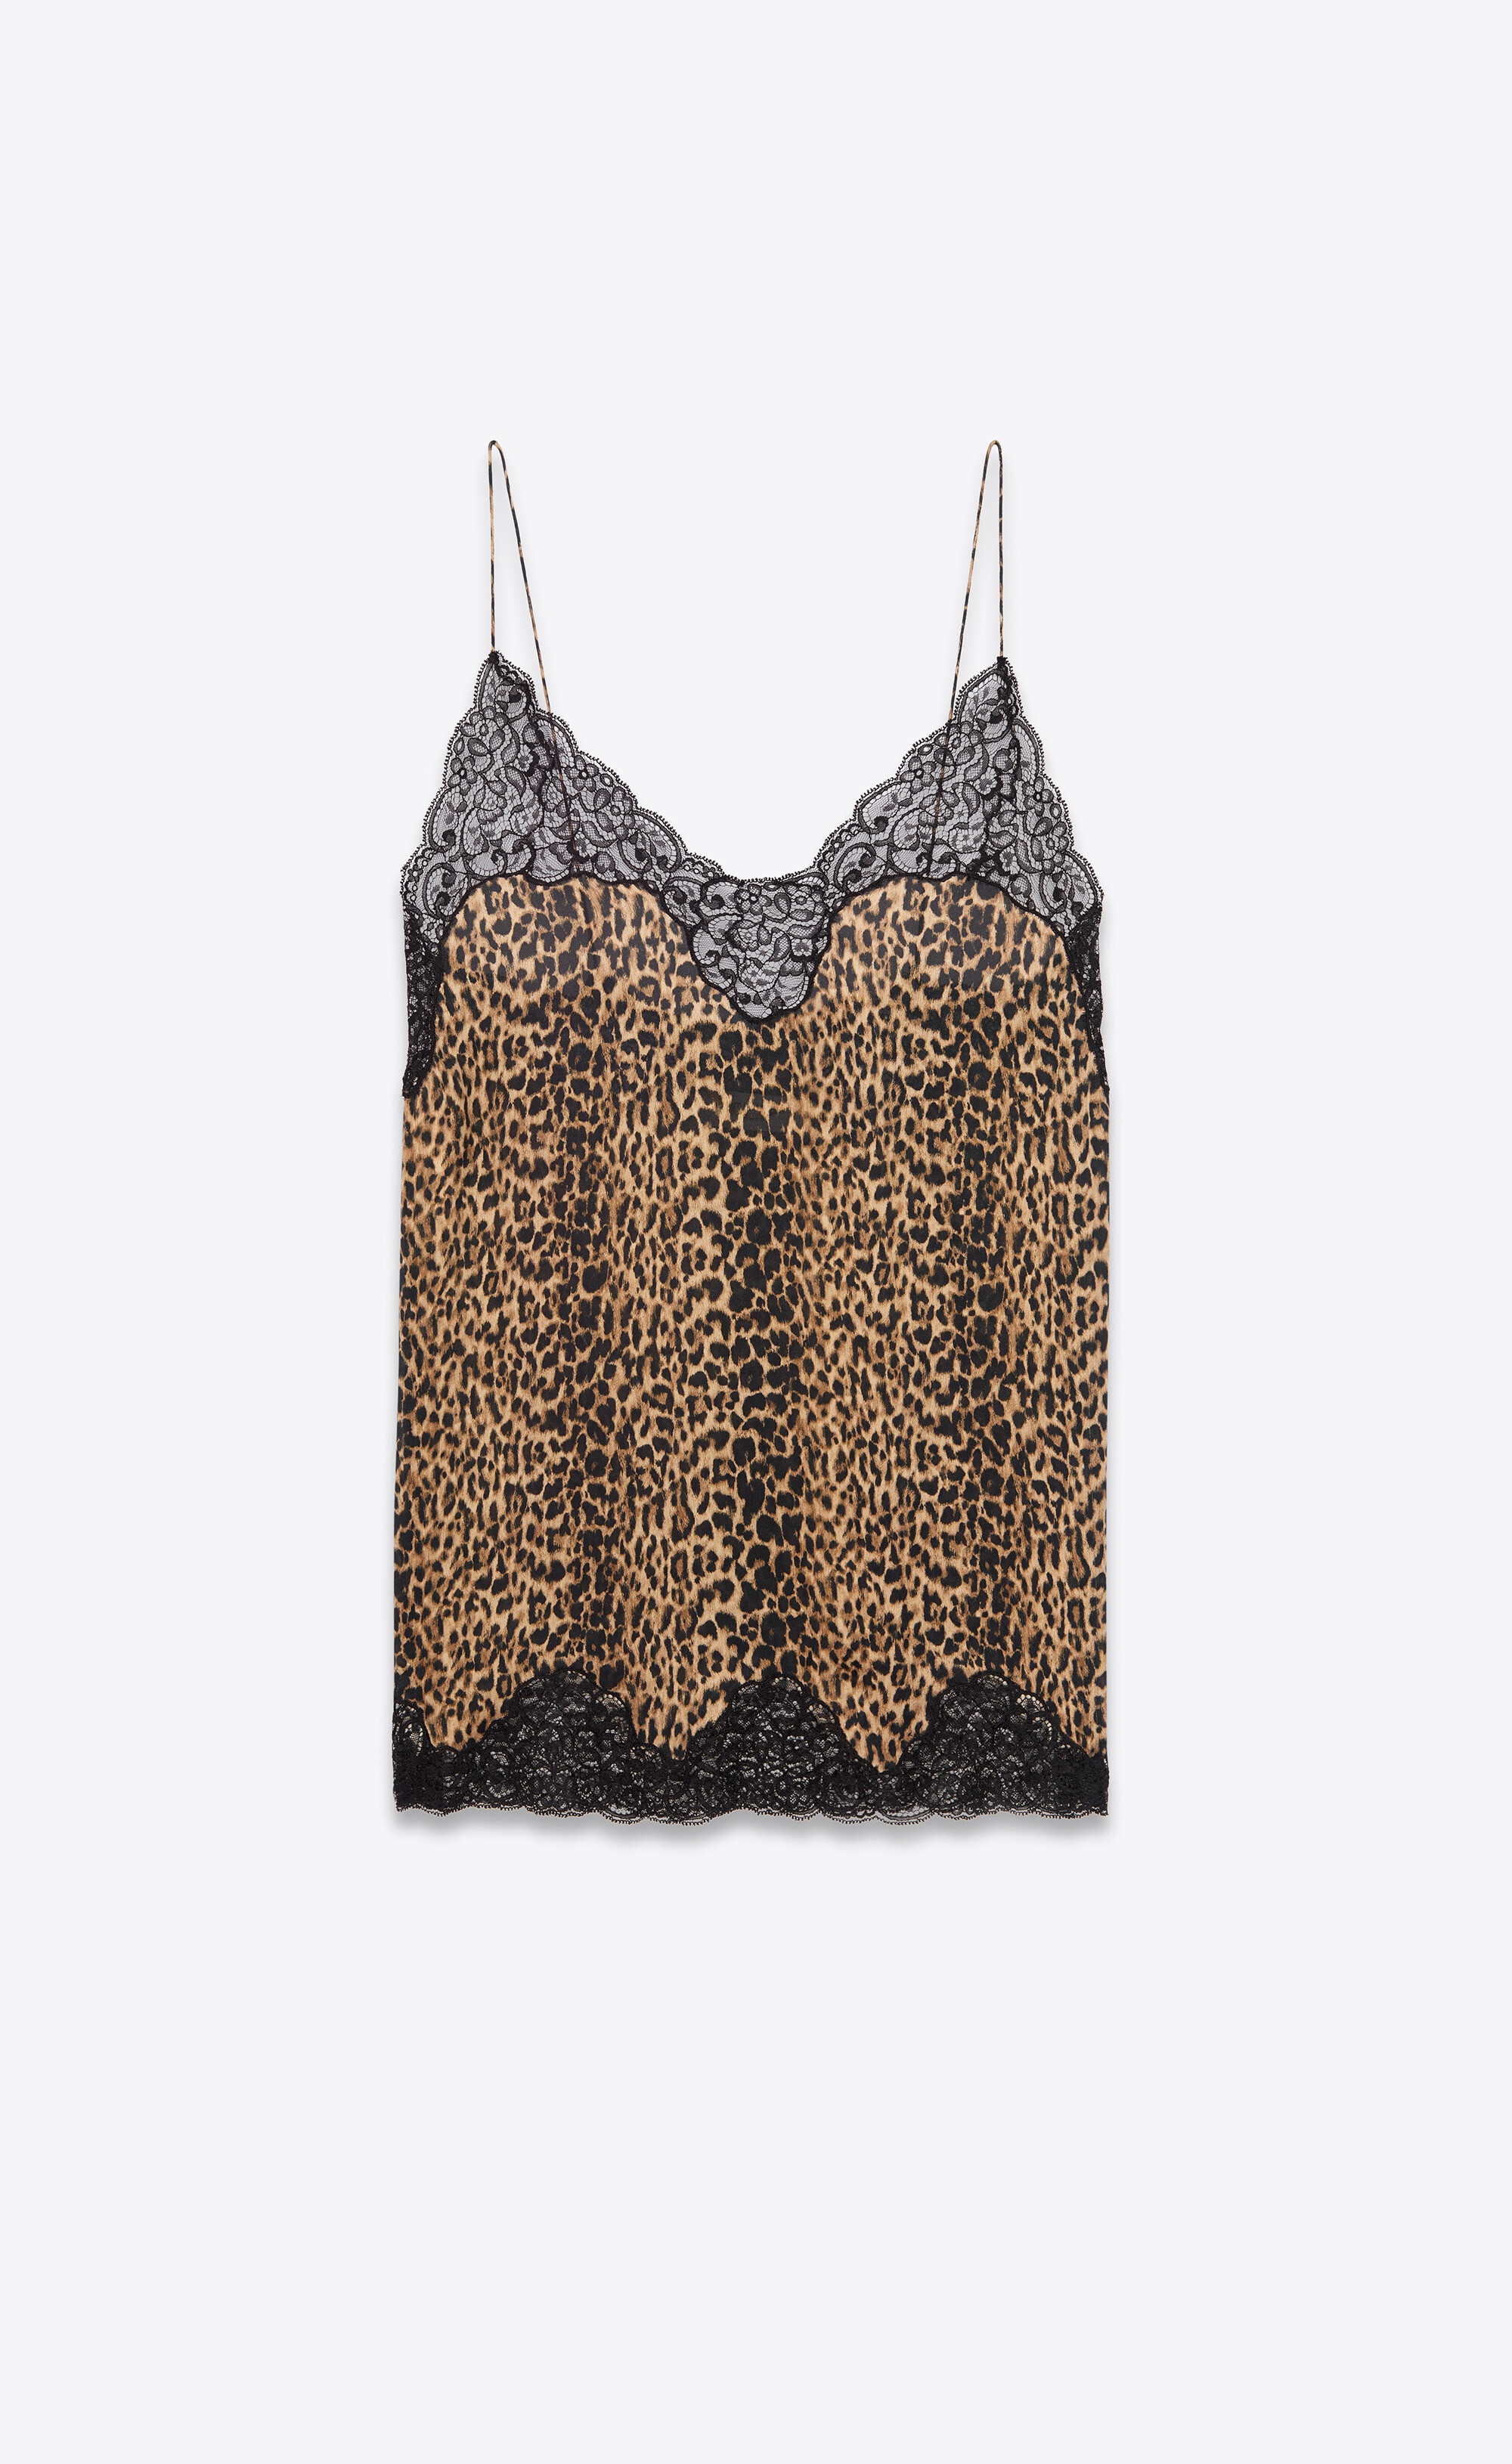 nightgown in leopard-print silk charmeuse and lace - 1